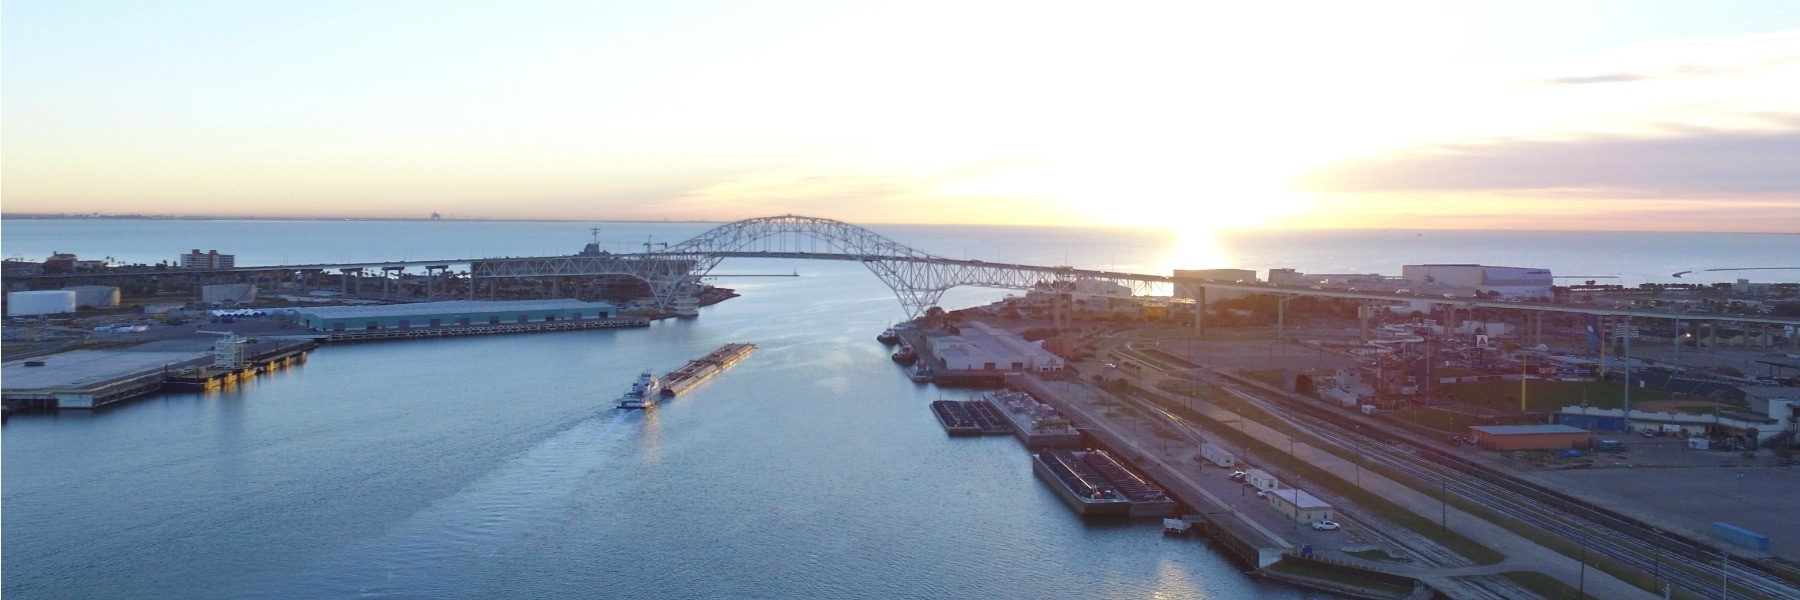 U.S. players eye fully integrated CCS solution at Port of Corpus Christi